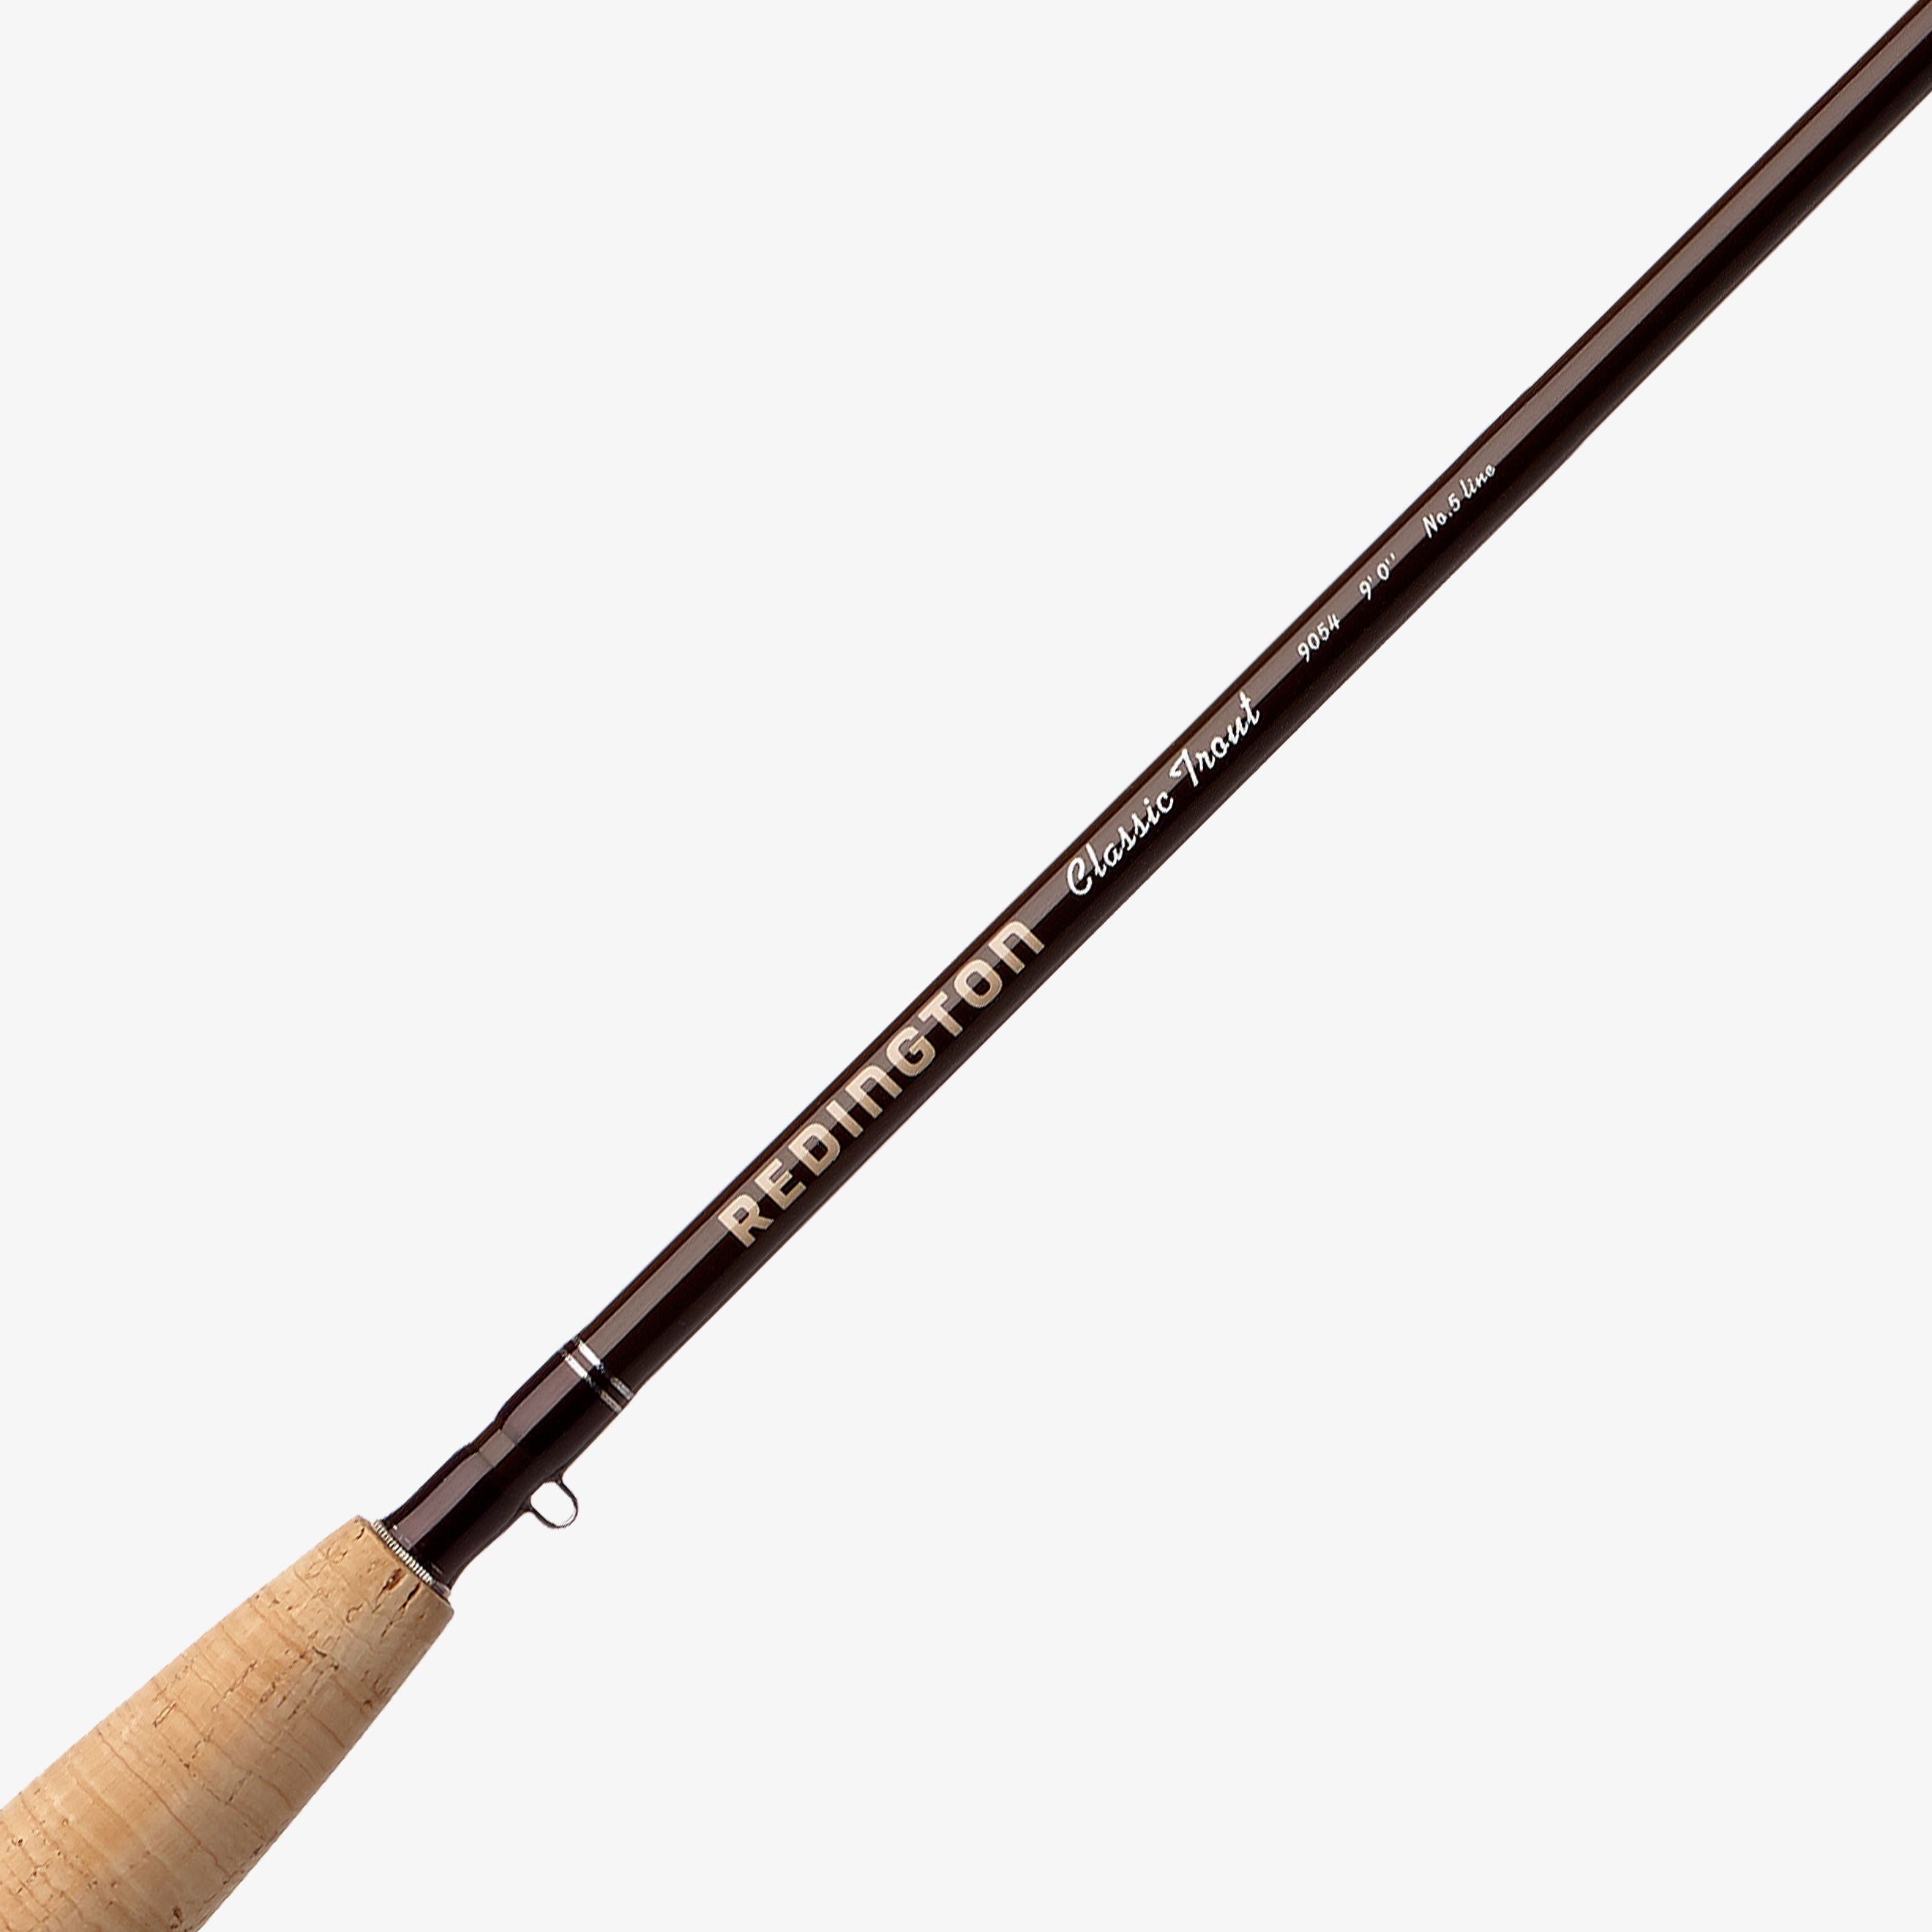 CLASSIC TROUT Fly Fishing Rod 5 Weight, 9ft